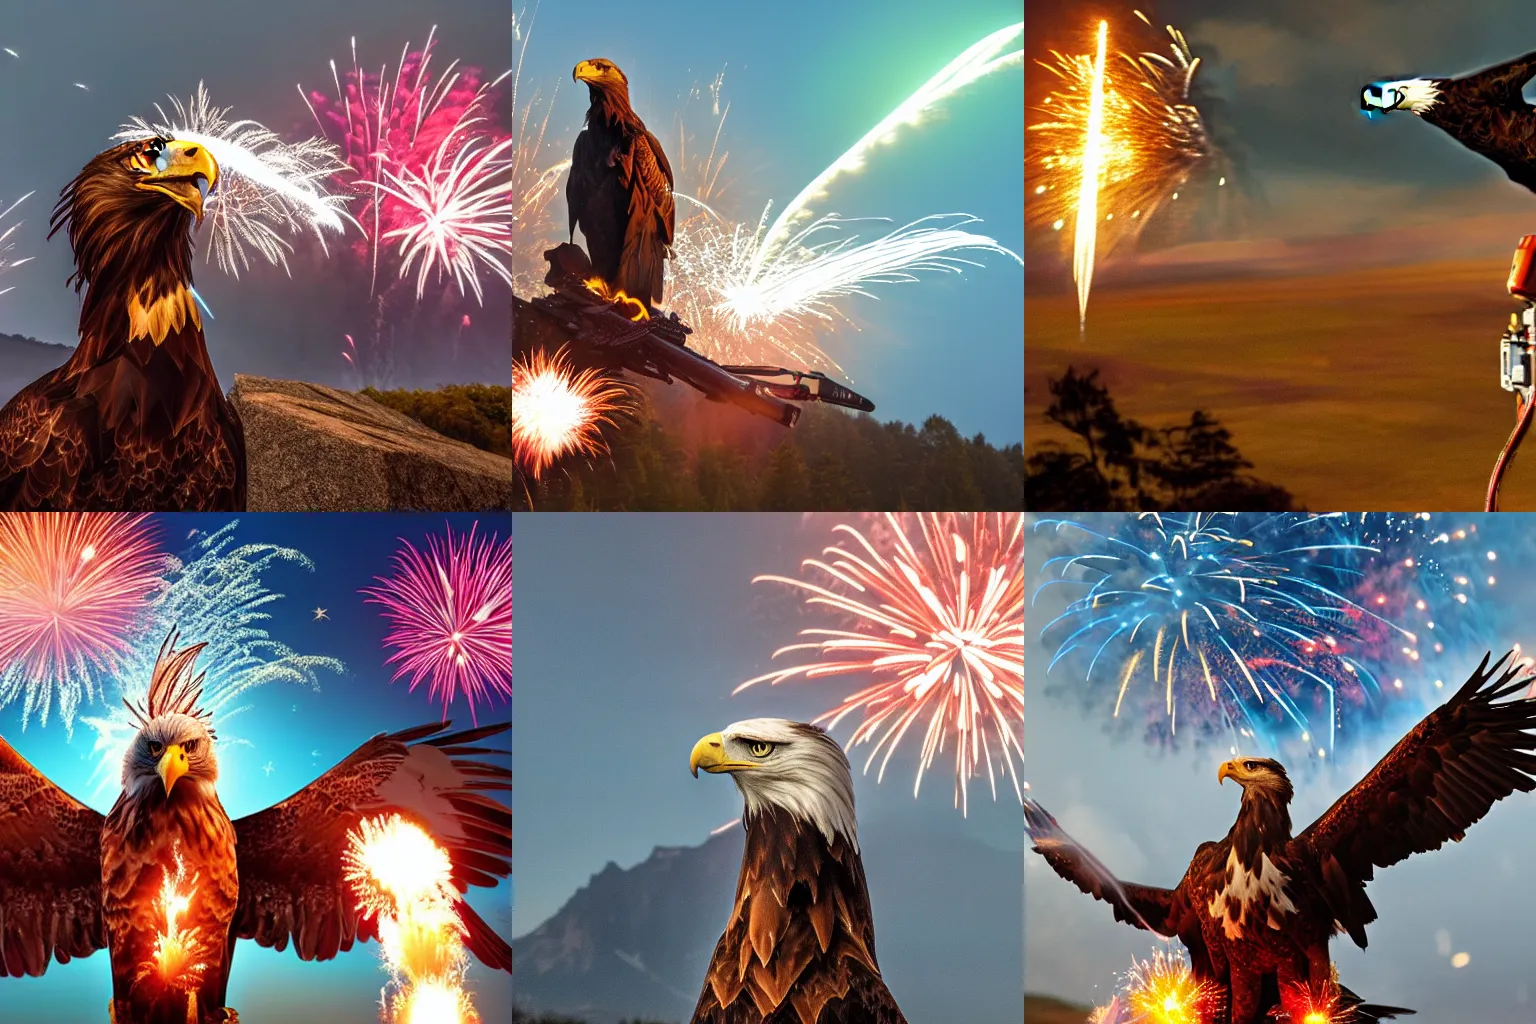 Prompt: a portrait of an eagle with a mohawk and flamethrower in a scenic environment with fireworks in the background